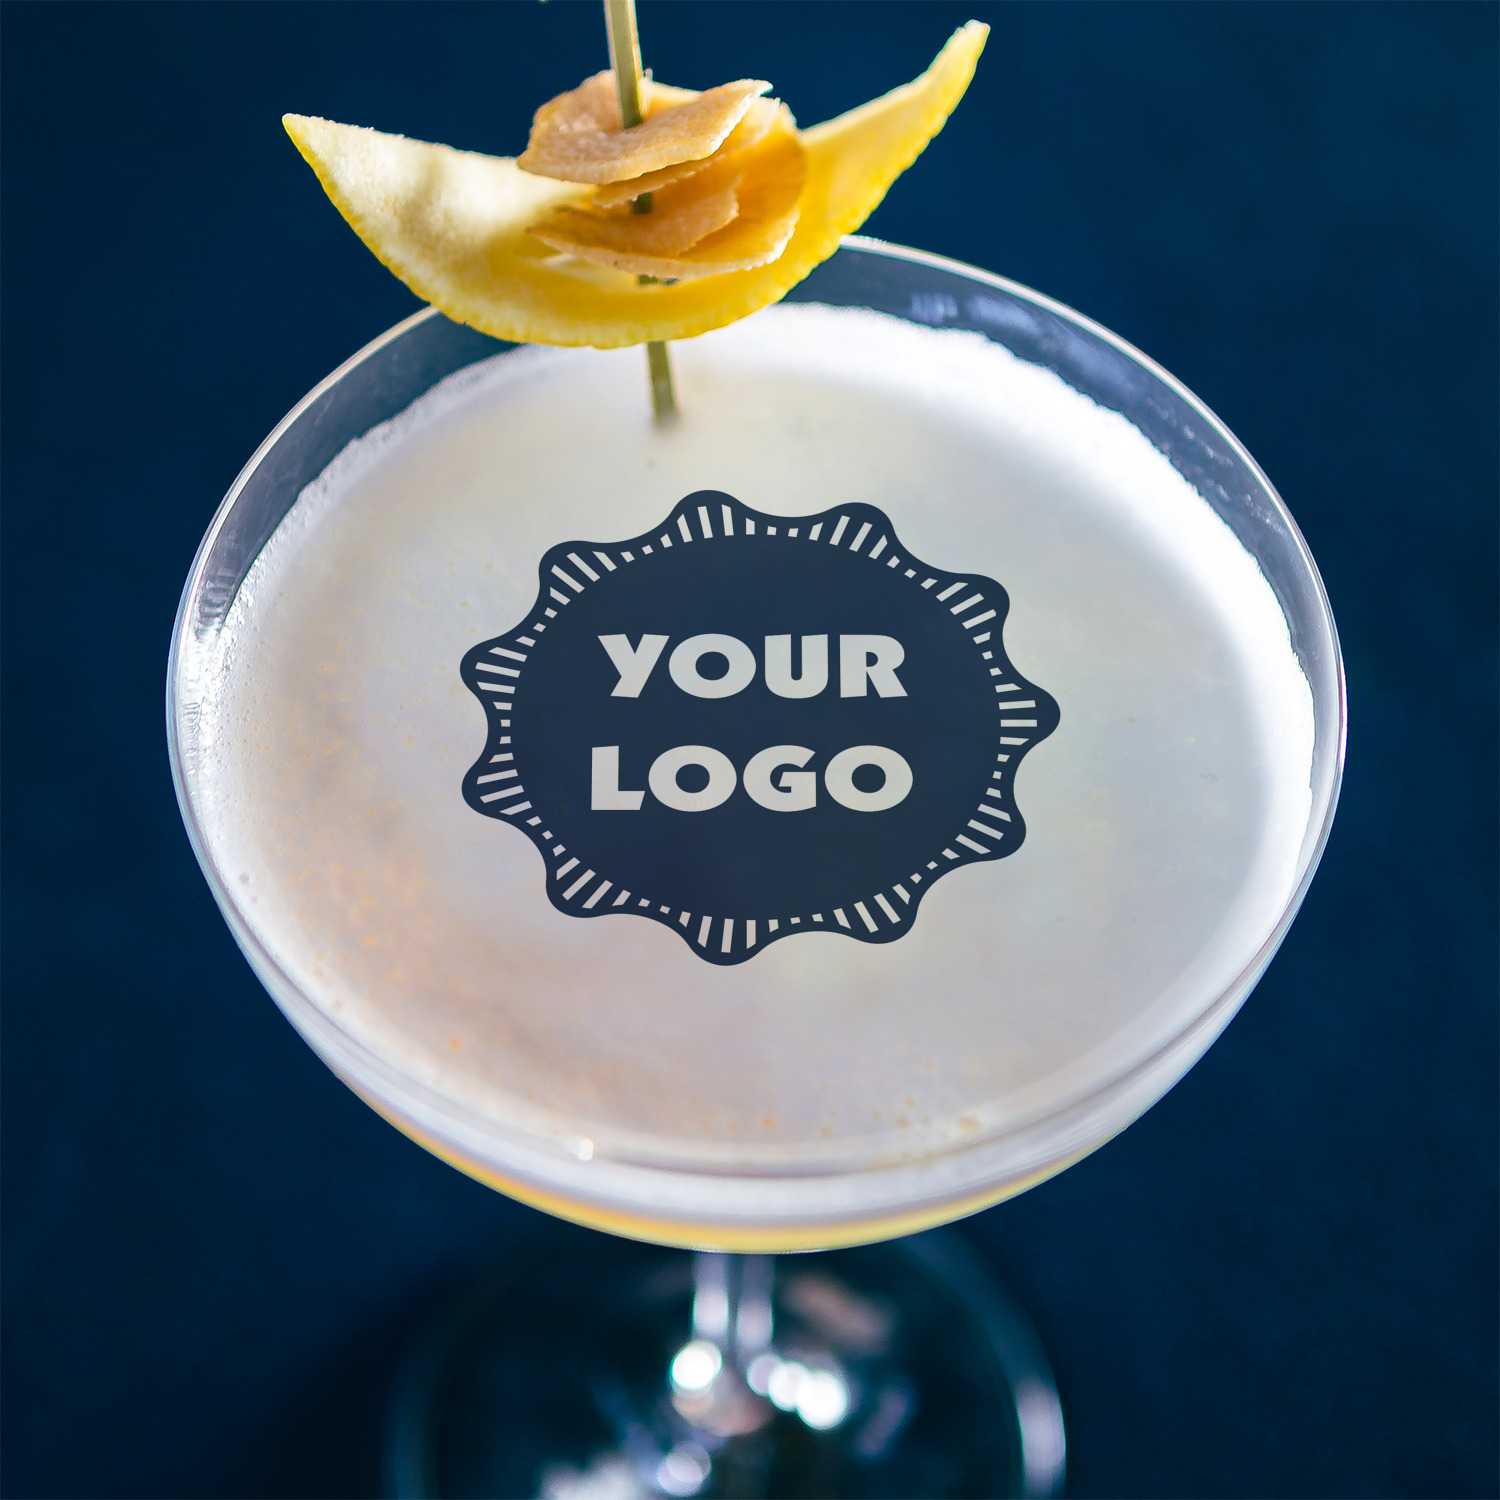 Edible Drink Cocktail Topper Images Logos & Photos on Thick Wafer Pape –  Signature Drink Lab